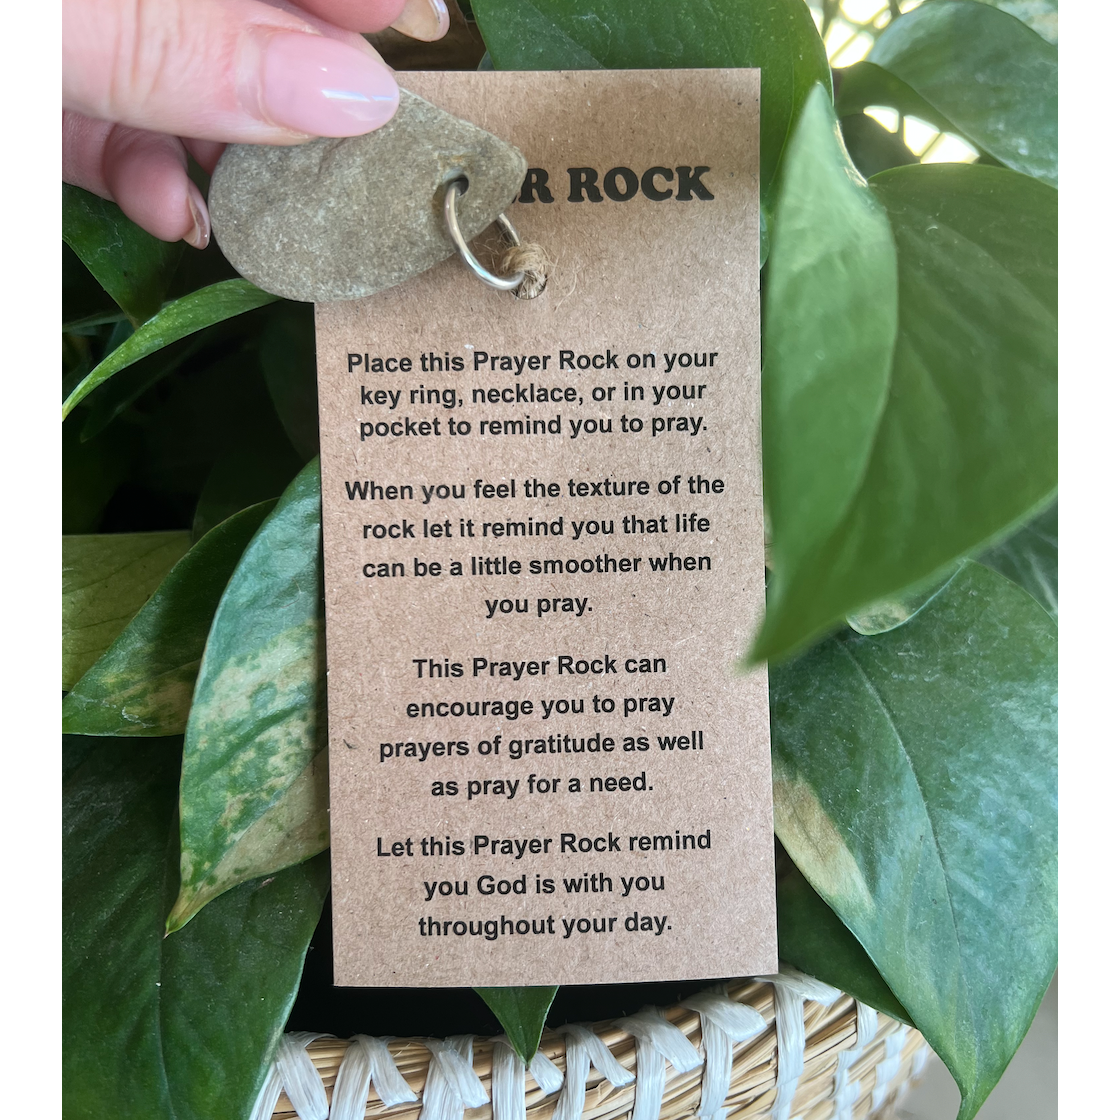 This Prayer Rock can be attached to your key ring, handbag, book bag or carried in your pocket to remind you to pray and that God is with you throughout your day. This Prayer Rock can encourage you to pray for a need as well as prayers of gratitude. When you feel the texture of the rock, let it remind you that life can be a little smoother when you pray. Amethyst Home provides interior design services, furniture, rugs, and lighting in the Malibu metro area.